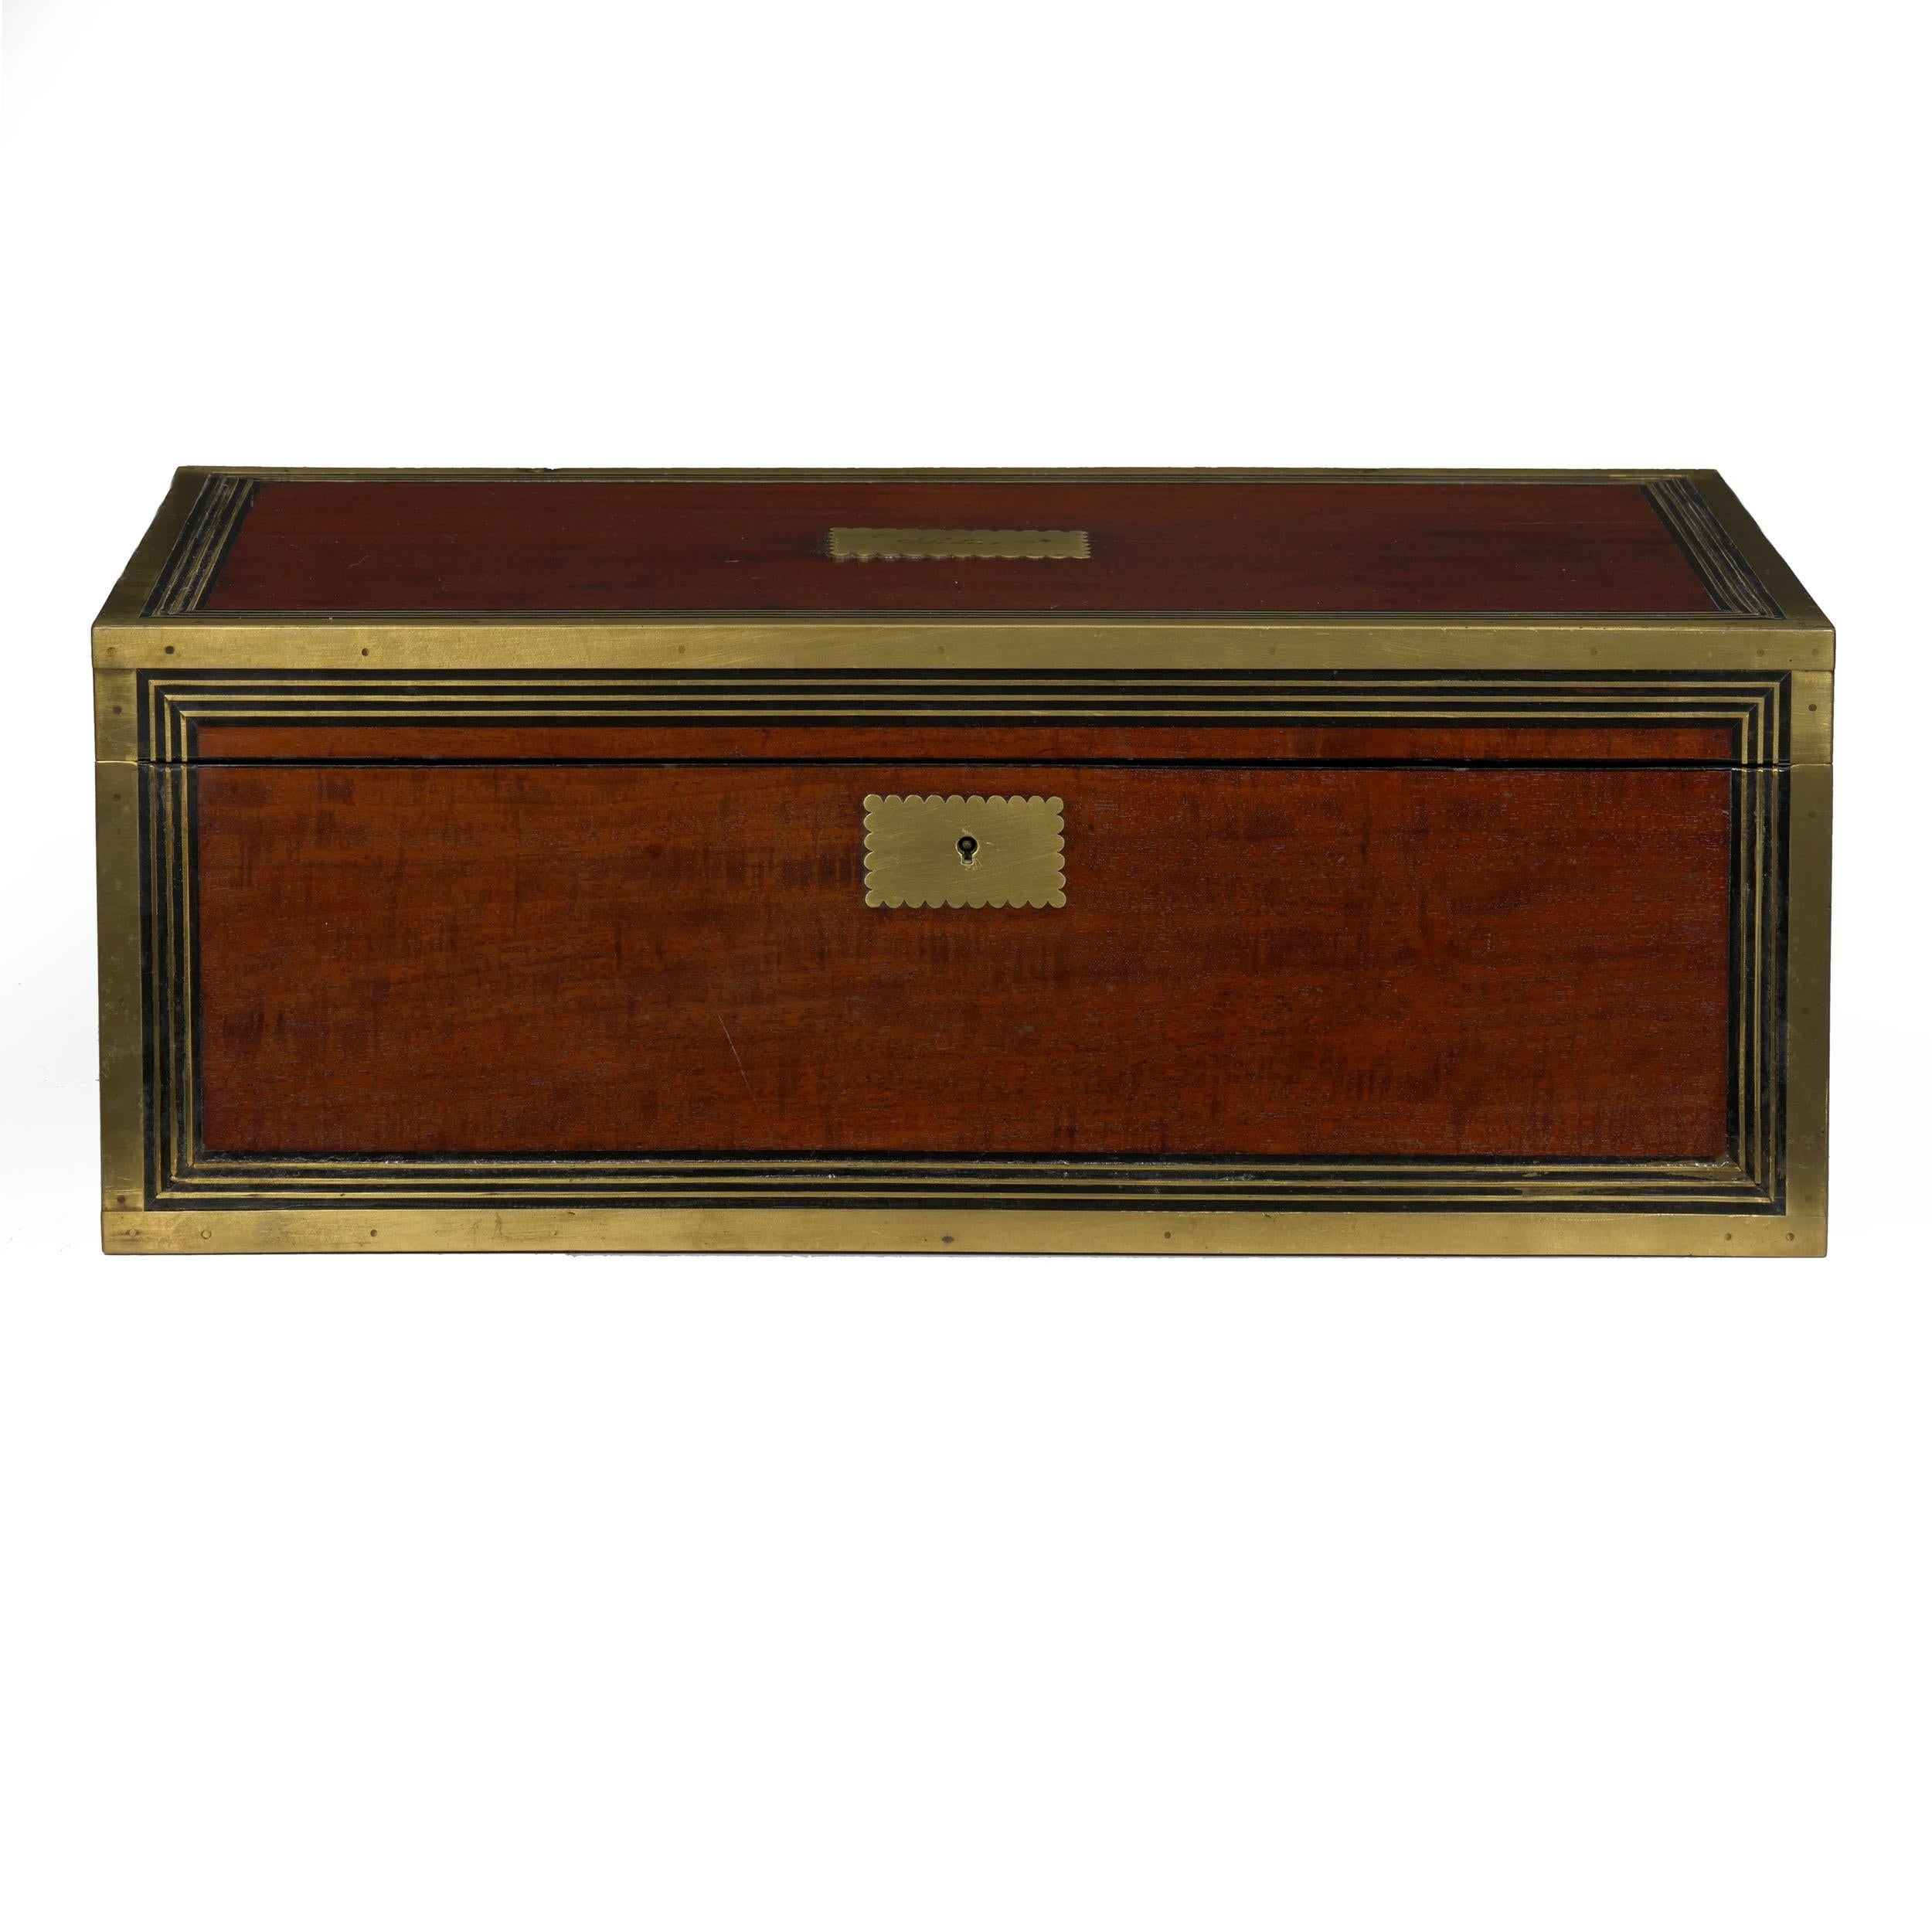 A beautifully preserved box of exquisite craftsmanship, this delightful Victorian writing slope features gorgeous patinated mahogany that positively glows under the French polished shellac and wax, a fine contrast against the brass inlays and border